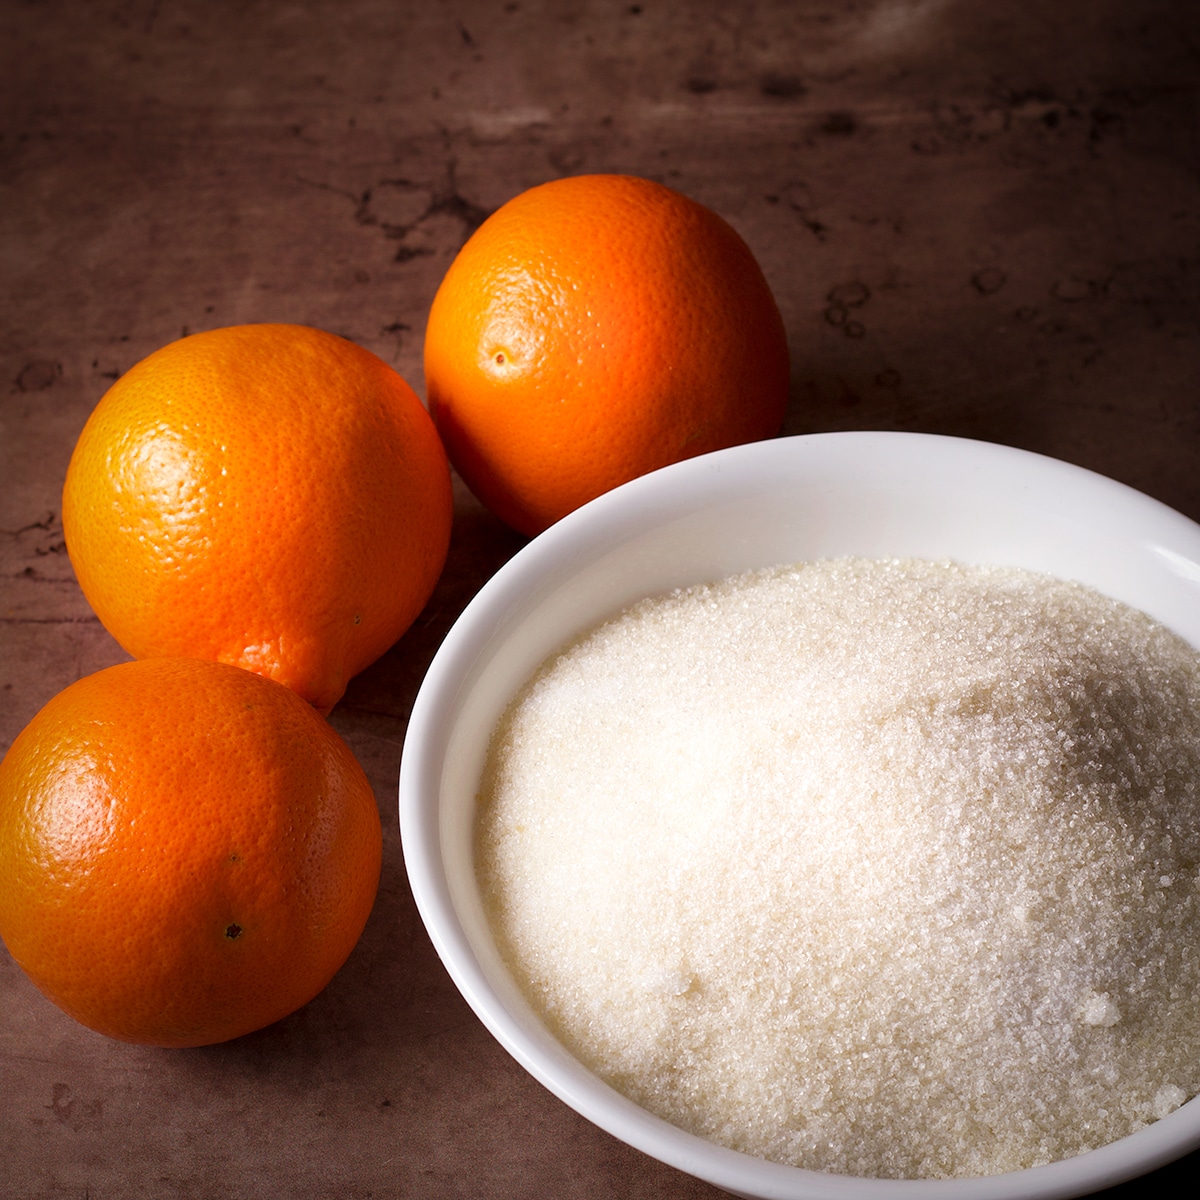 Oranges and a bowl of granulated sugar.